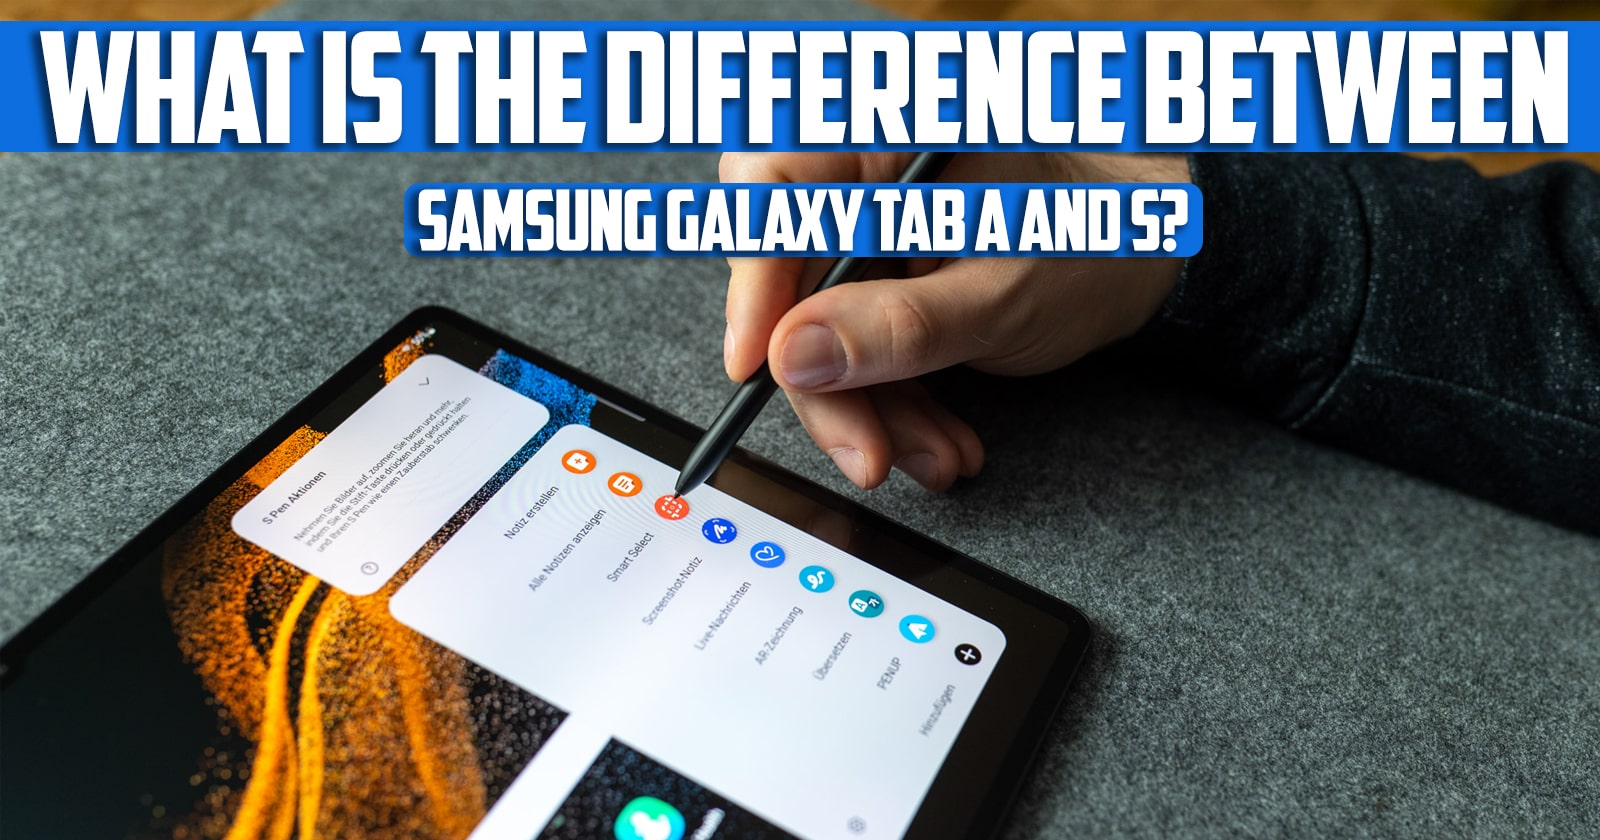 What is the difference between Samsung galaxy tab a and s?